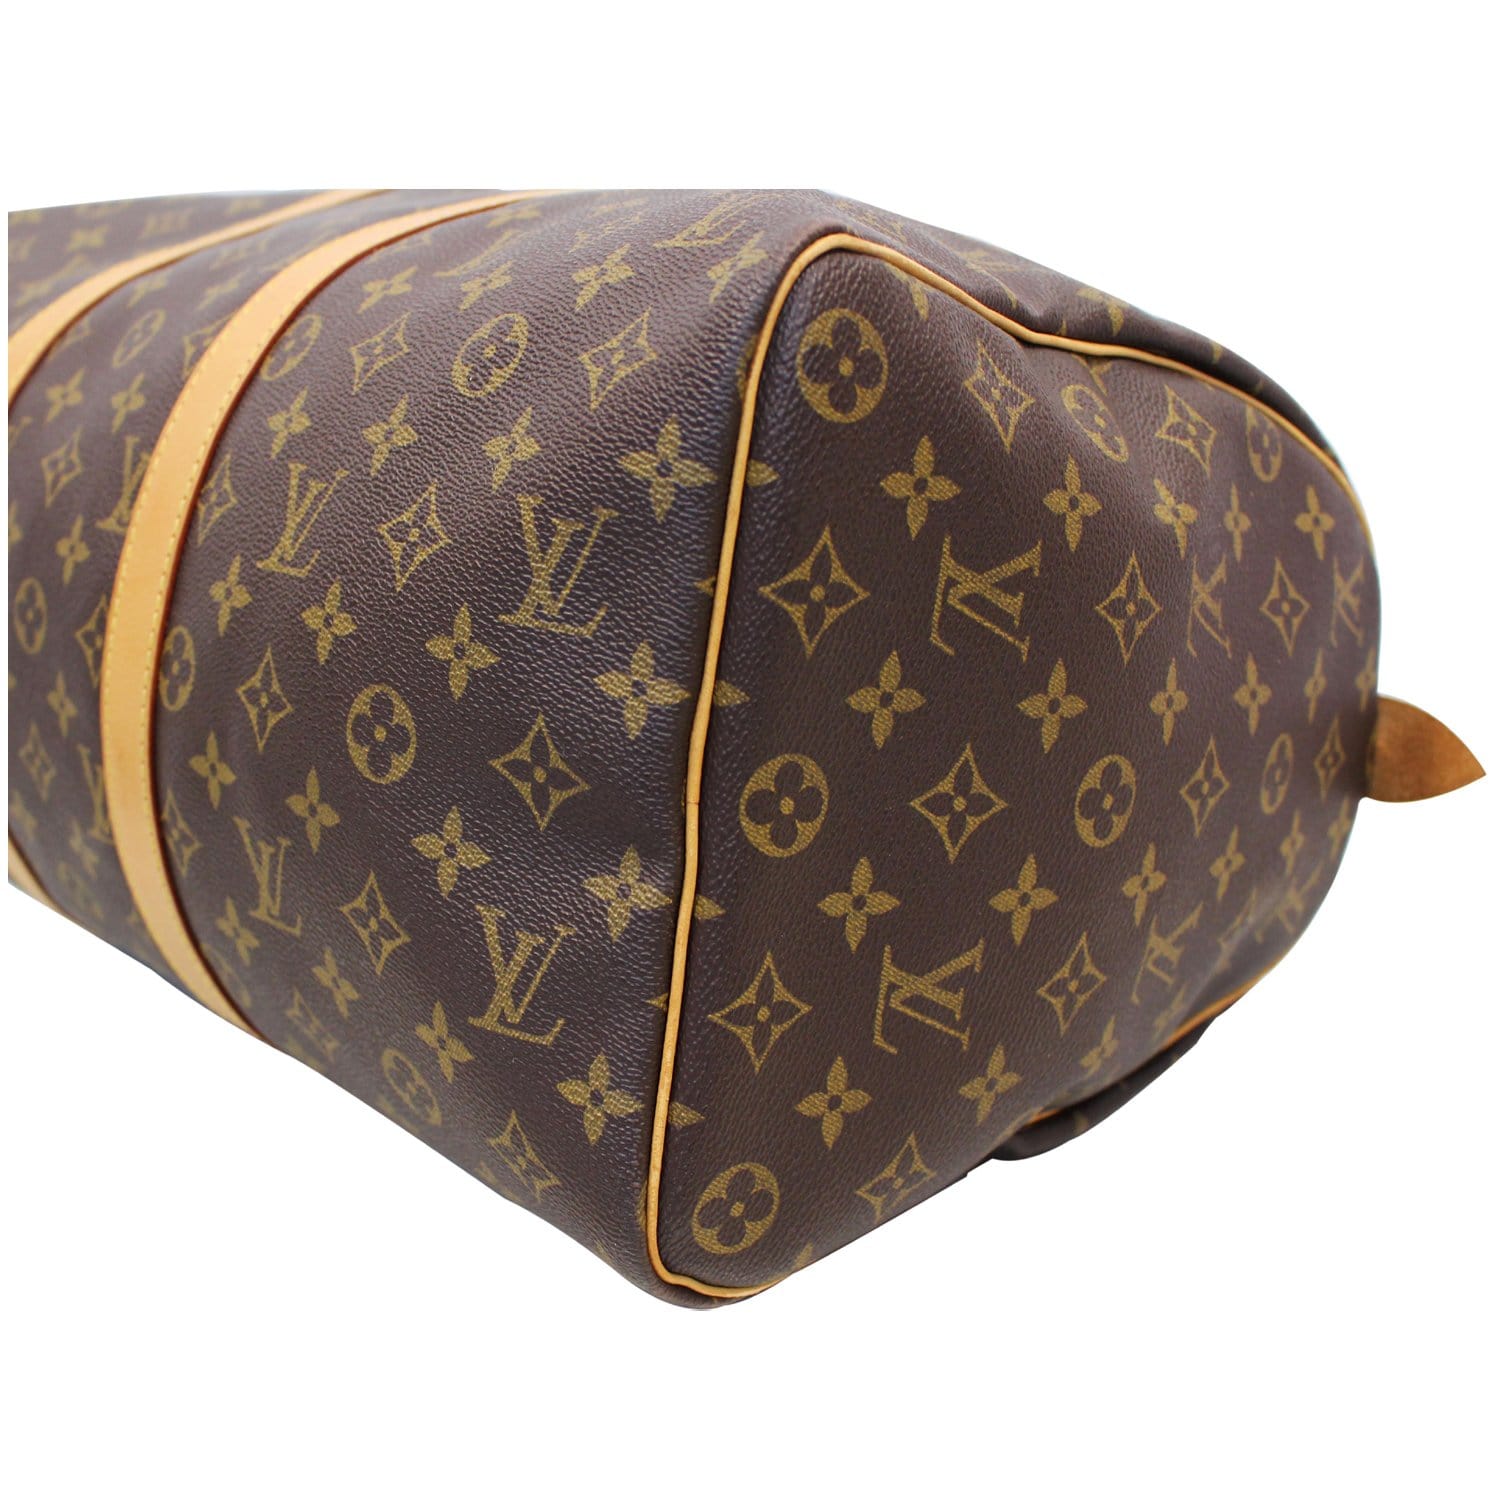 Authentic Louis Vuitton Monogram Keepall 45 Travel Carry On Bag